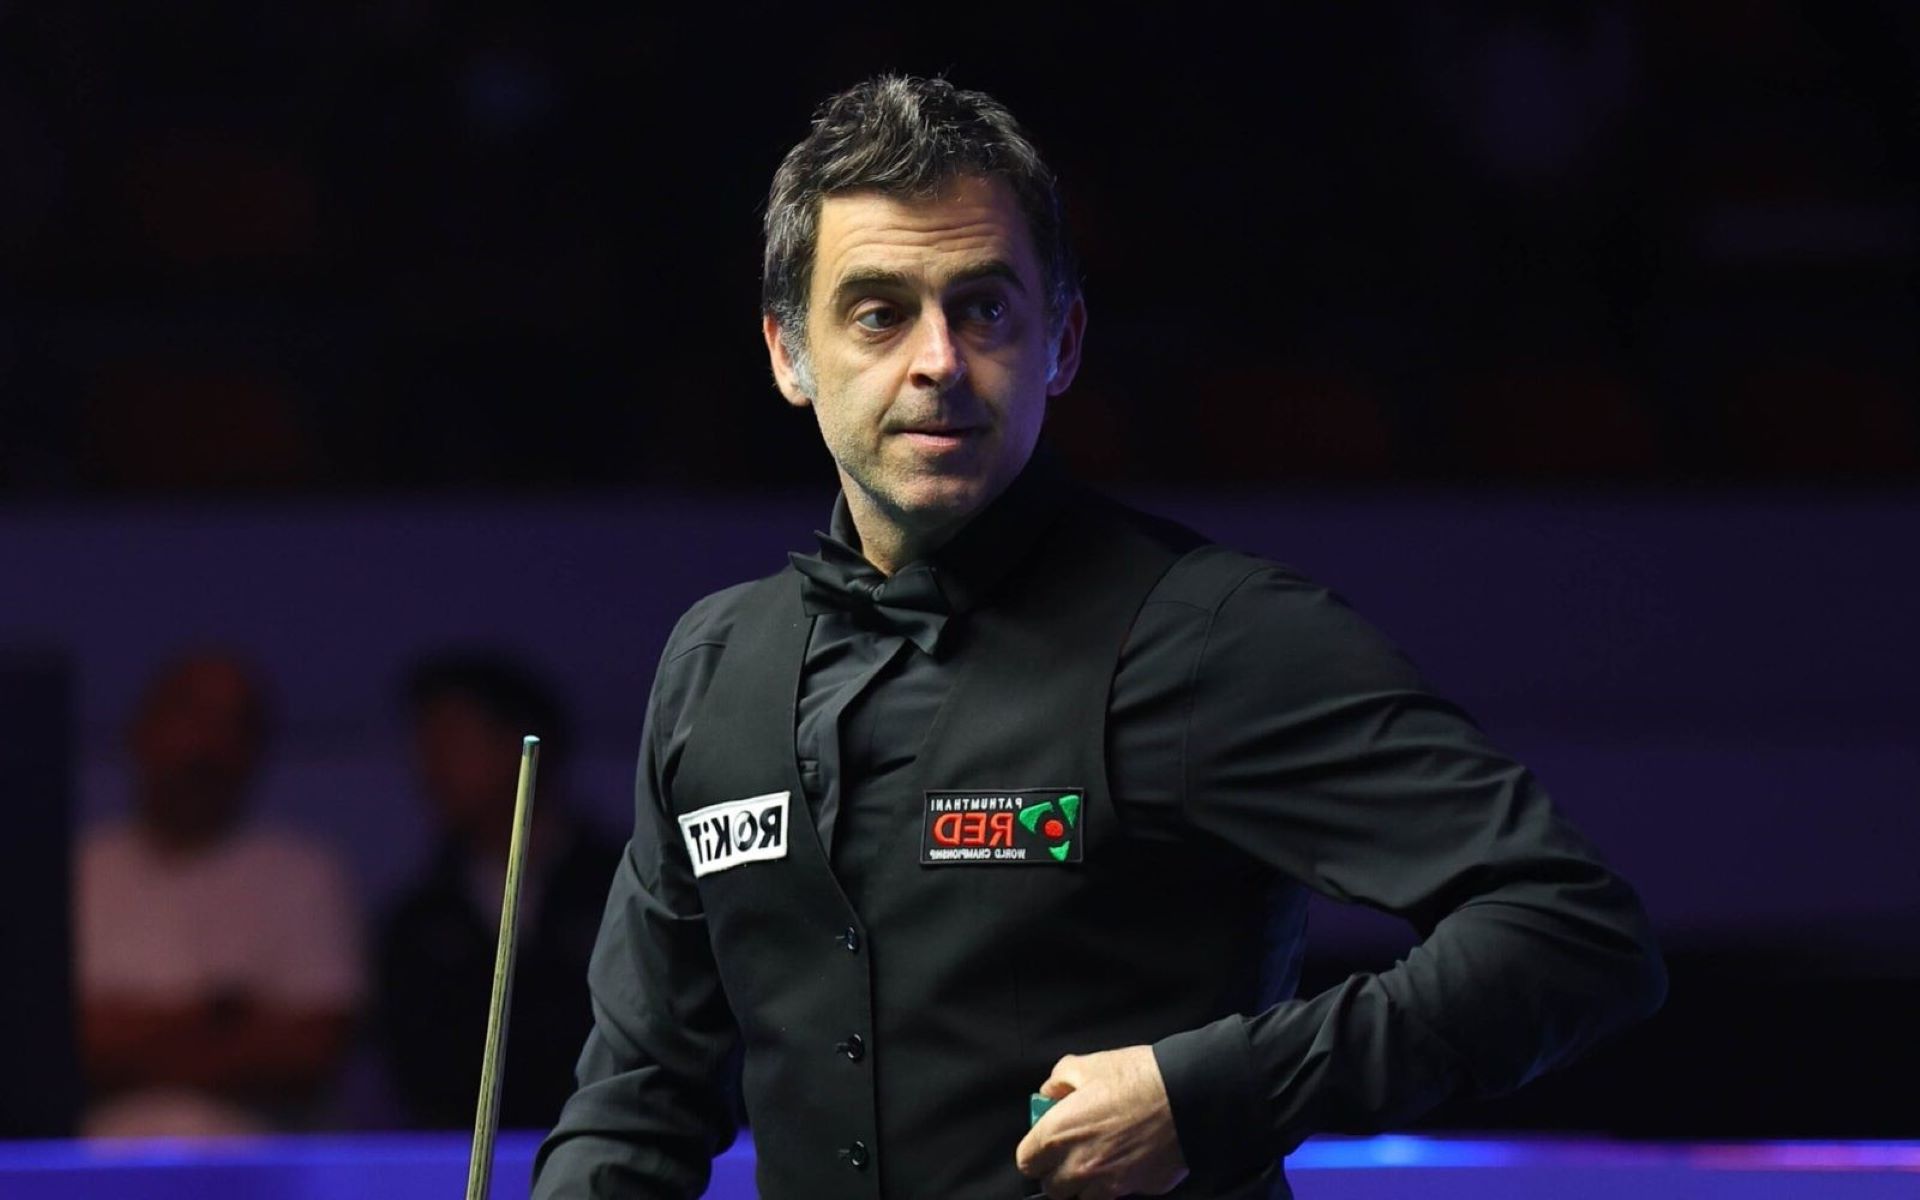 An Interview With Running Enthusiast And Snooker Legend Ronnie O’Sullivan